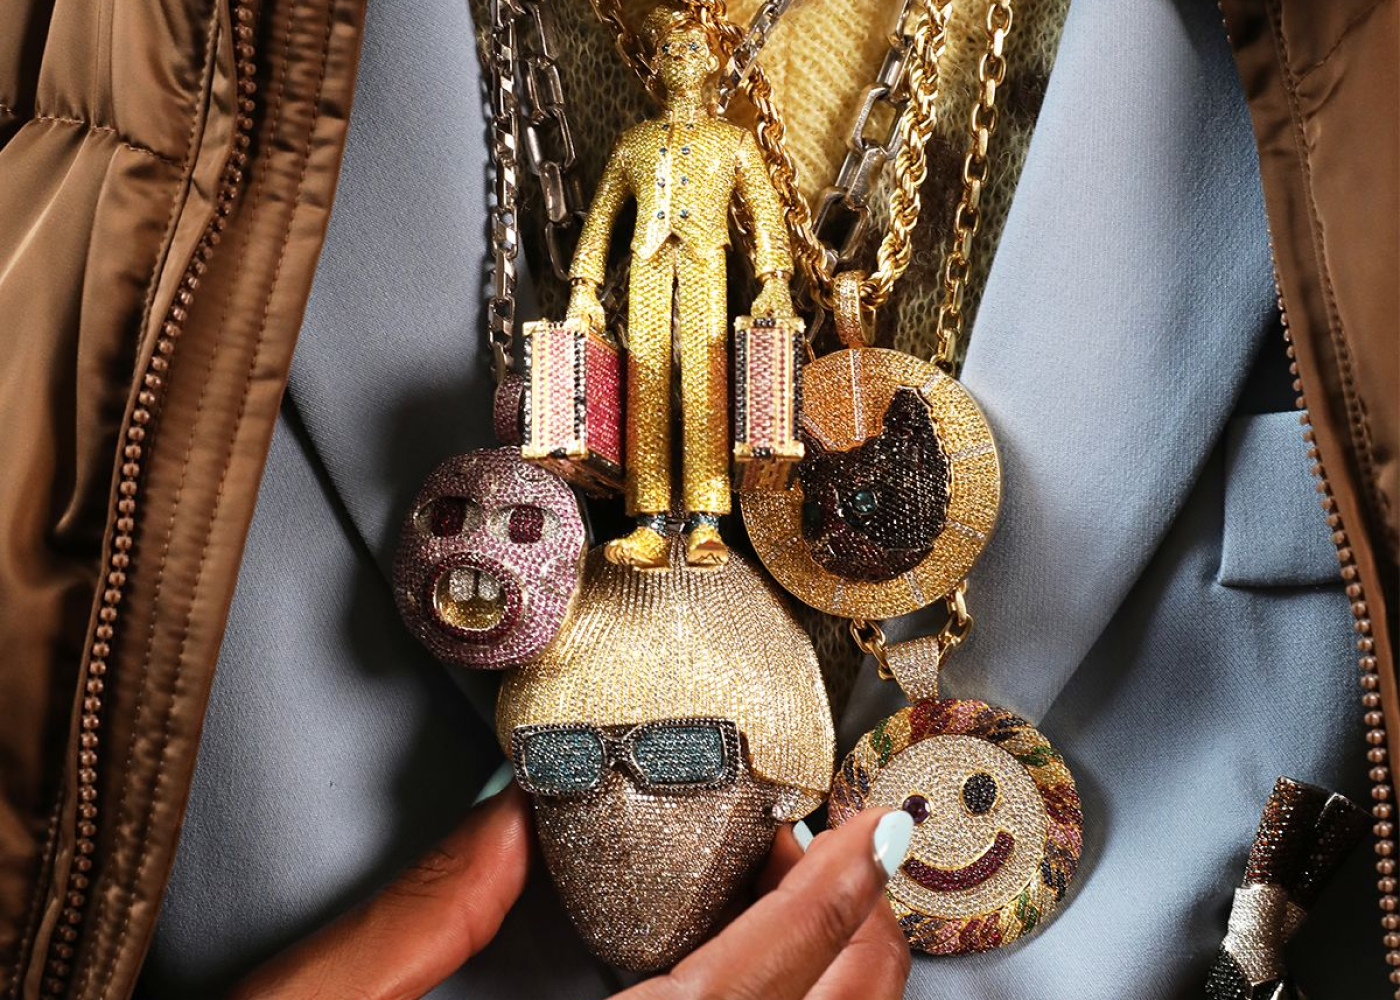 A suite of gem-encrusted necklaces worn by Tyler, The Creator, part of Ice Cold: An Exhibition of Hip-Hop Jewelry at the American Museum of Natural History. Credit Cam Hicks 